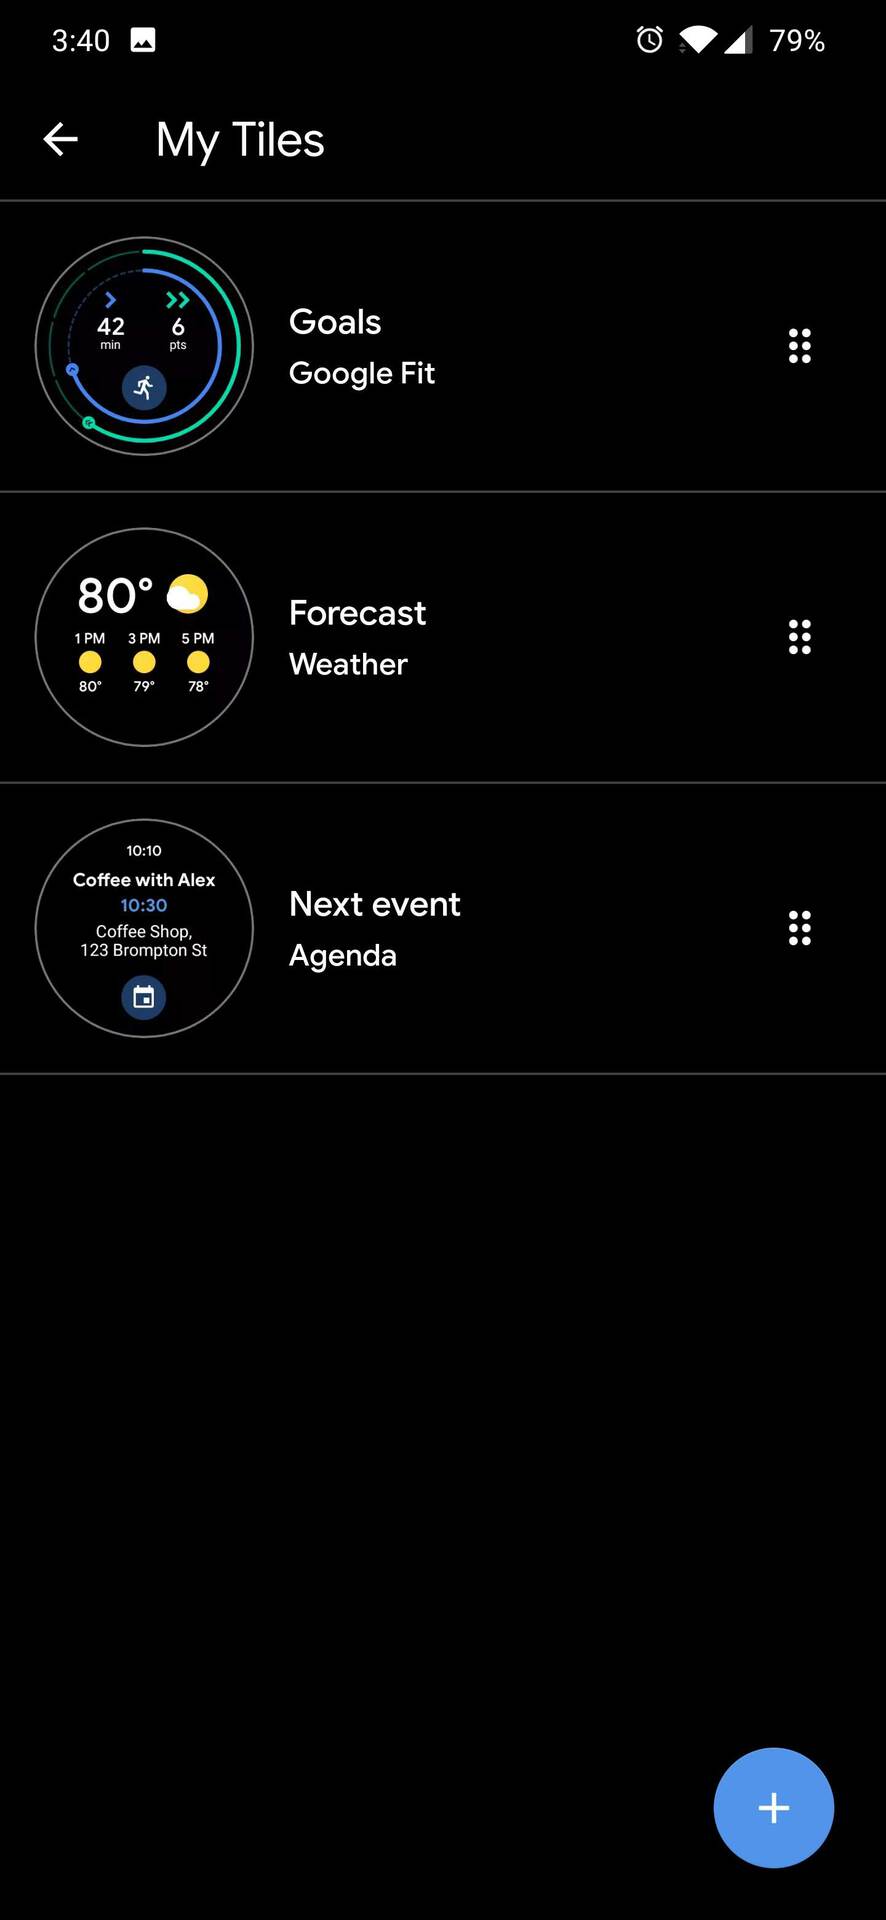 A screenshot of the Tiles manager function within the Wear OS smartphone app.